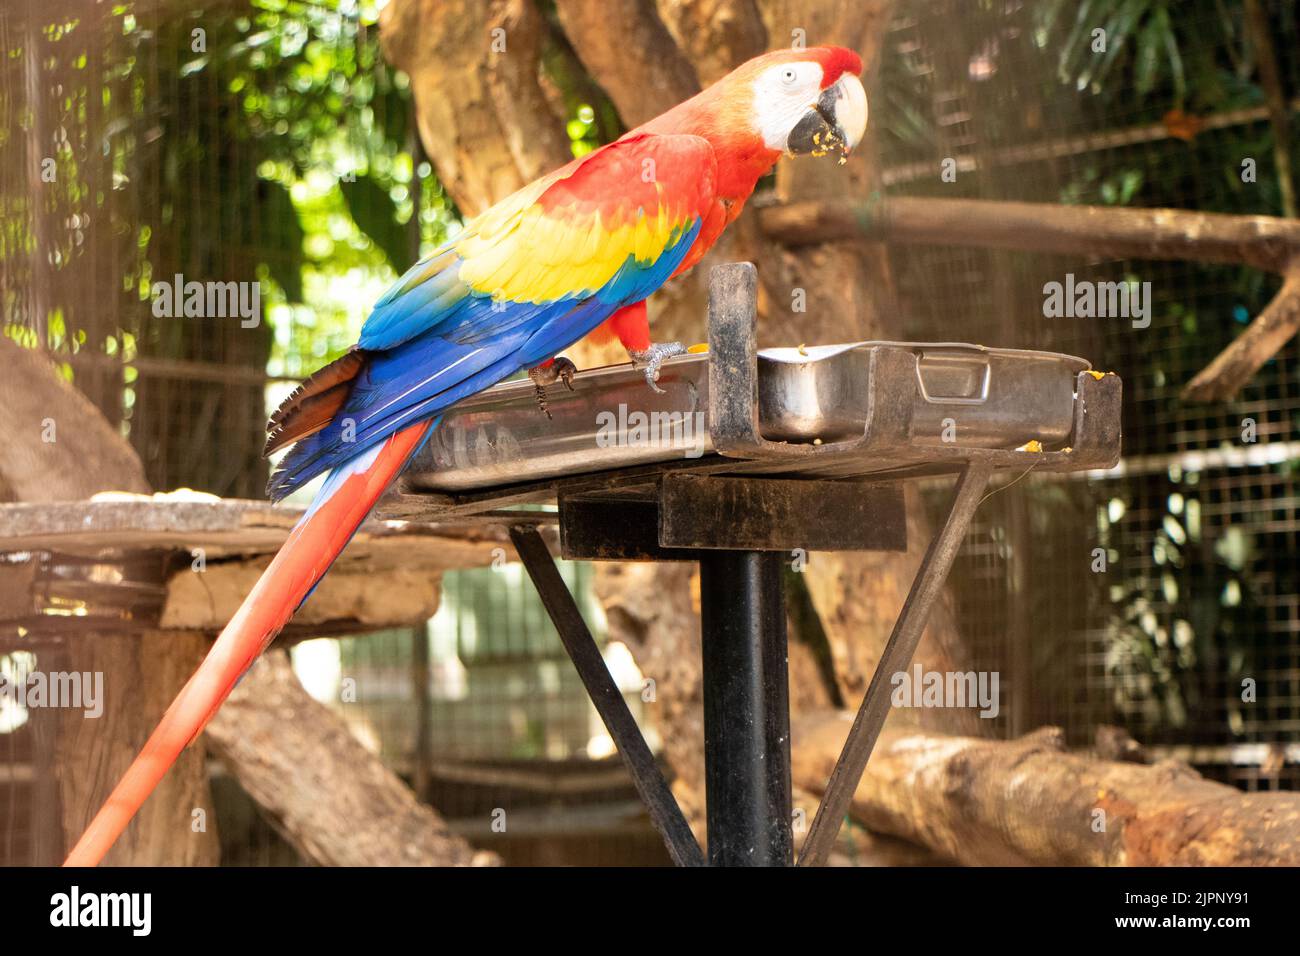 The parrots are a broad order of more than 350 birds. Macaws, Amazons, lorikeets, lovebirds, cockatoos, and many others are all considered parrots. Stock Photo